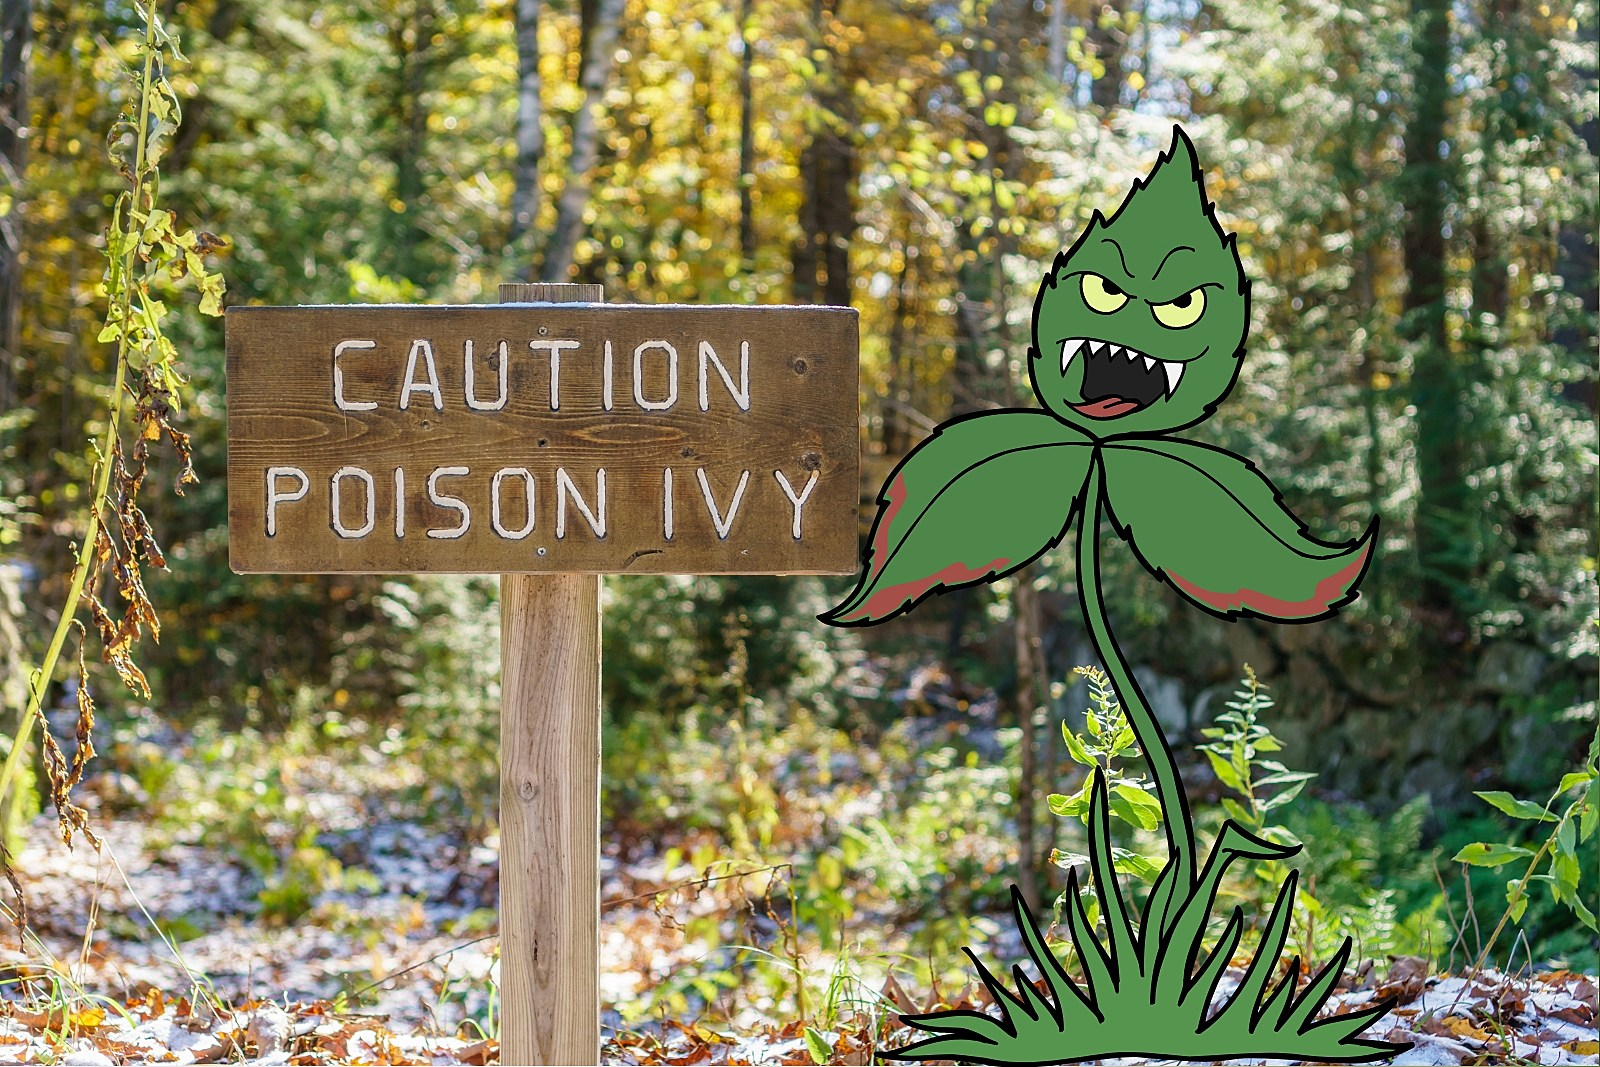 Poison ivy can work itchy evil on your skin – here's how